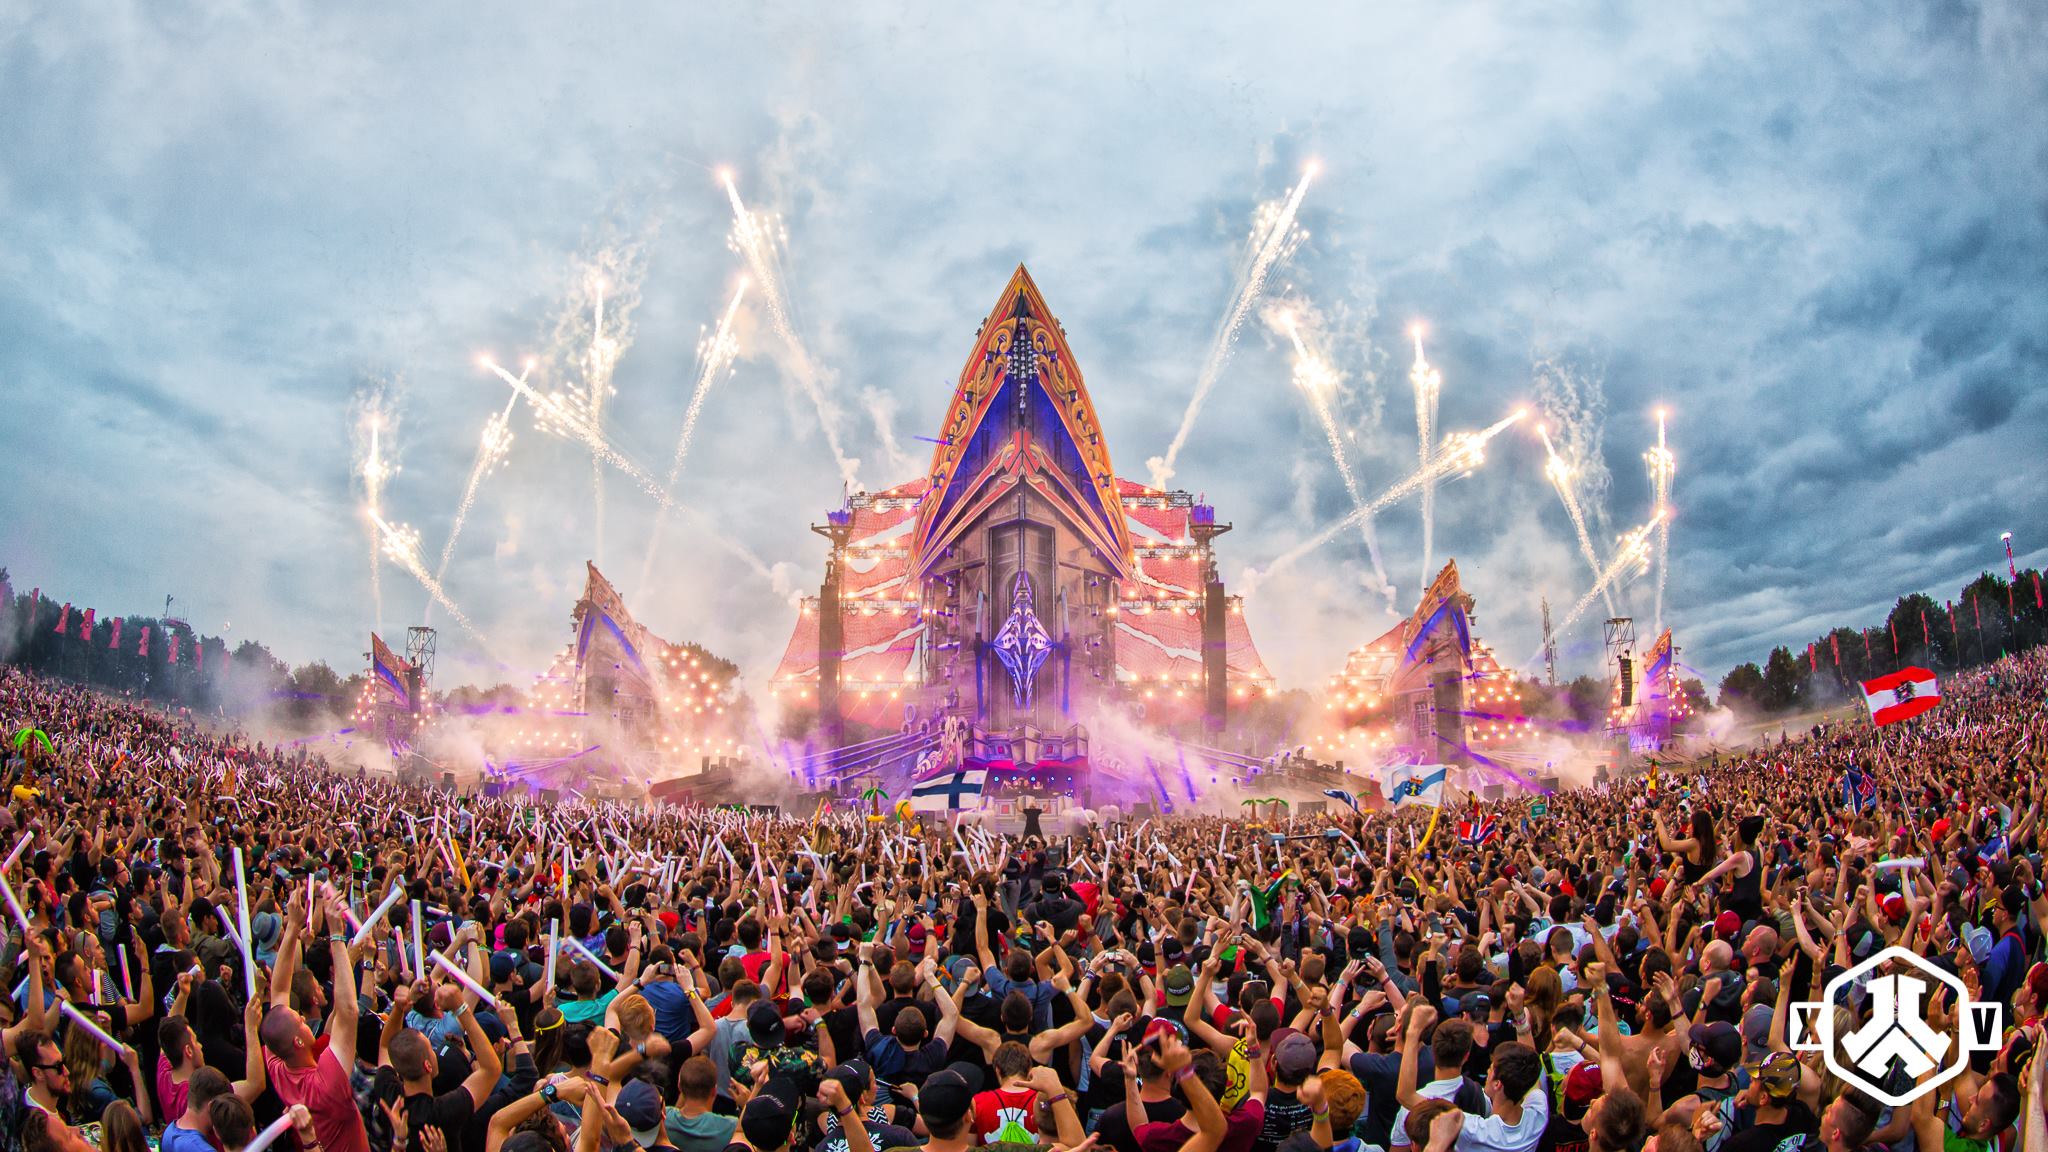 defqon 1 wallpaper,crowd,people,event,performance,festival